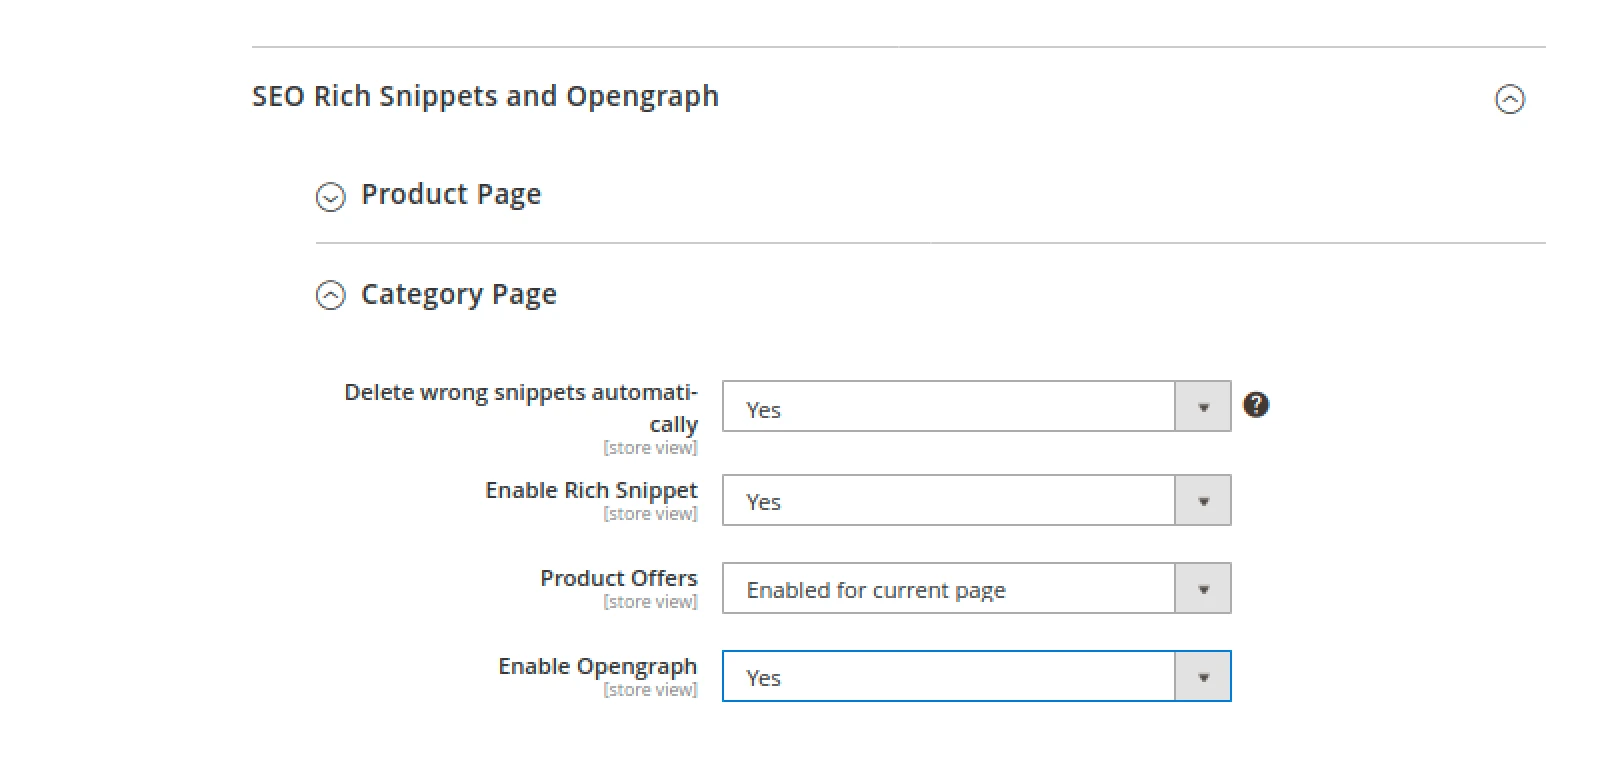 Opengraph toggle for category page in Mirasvit Advanced SEO Suite